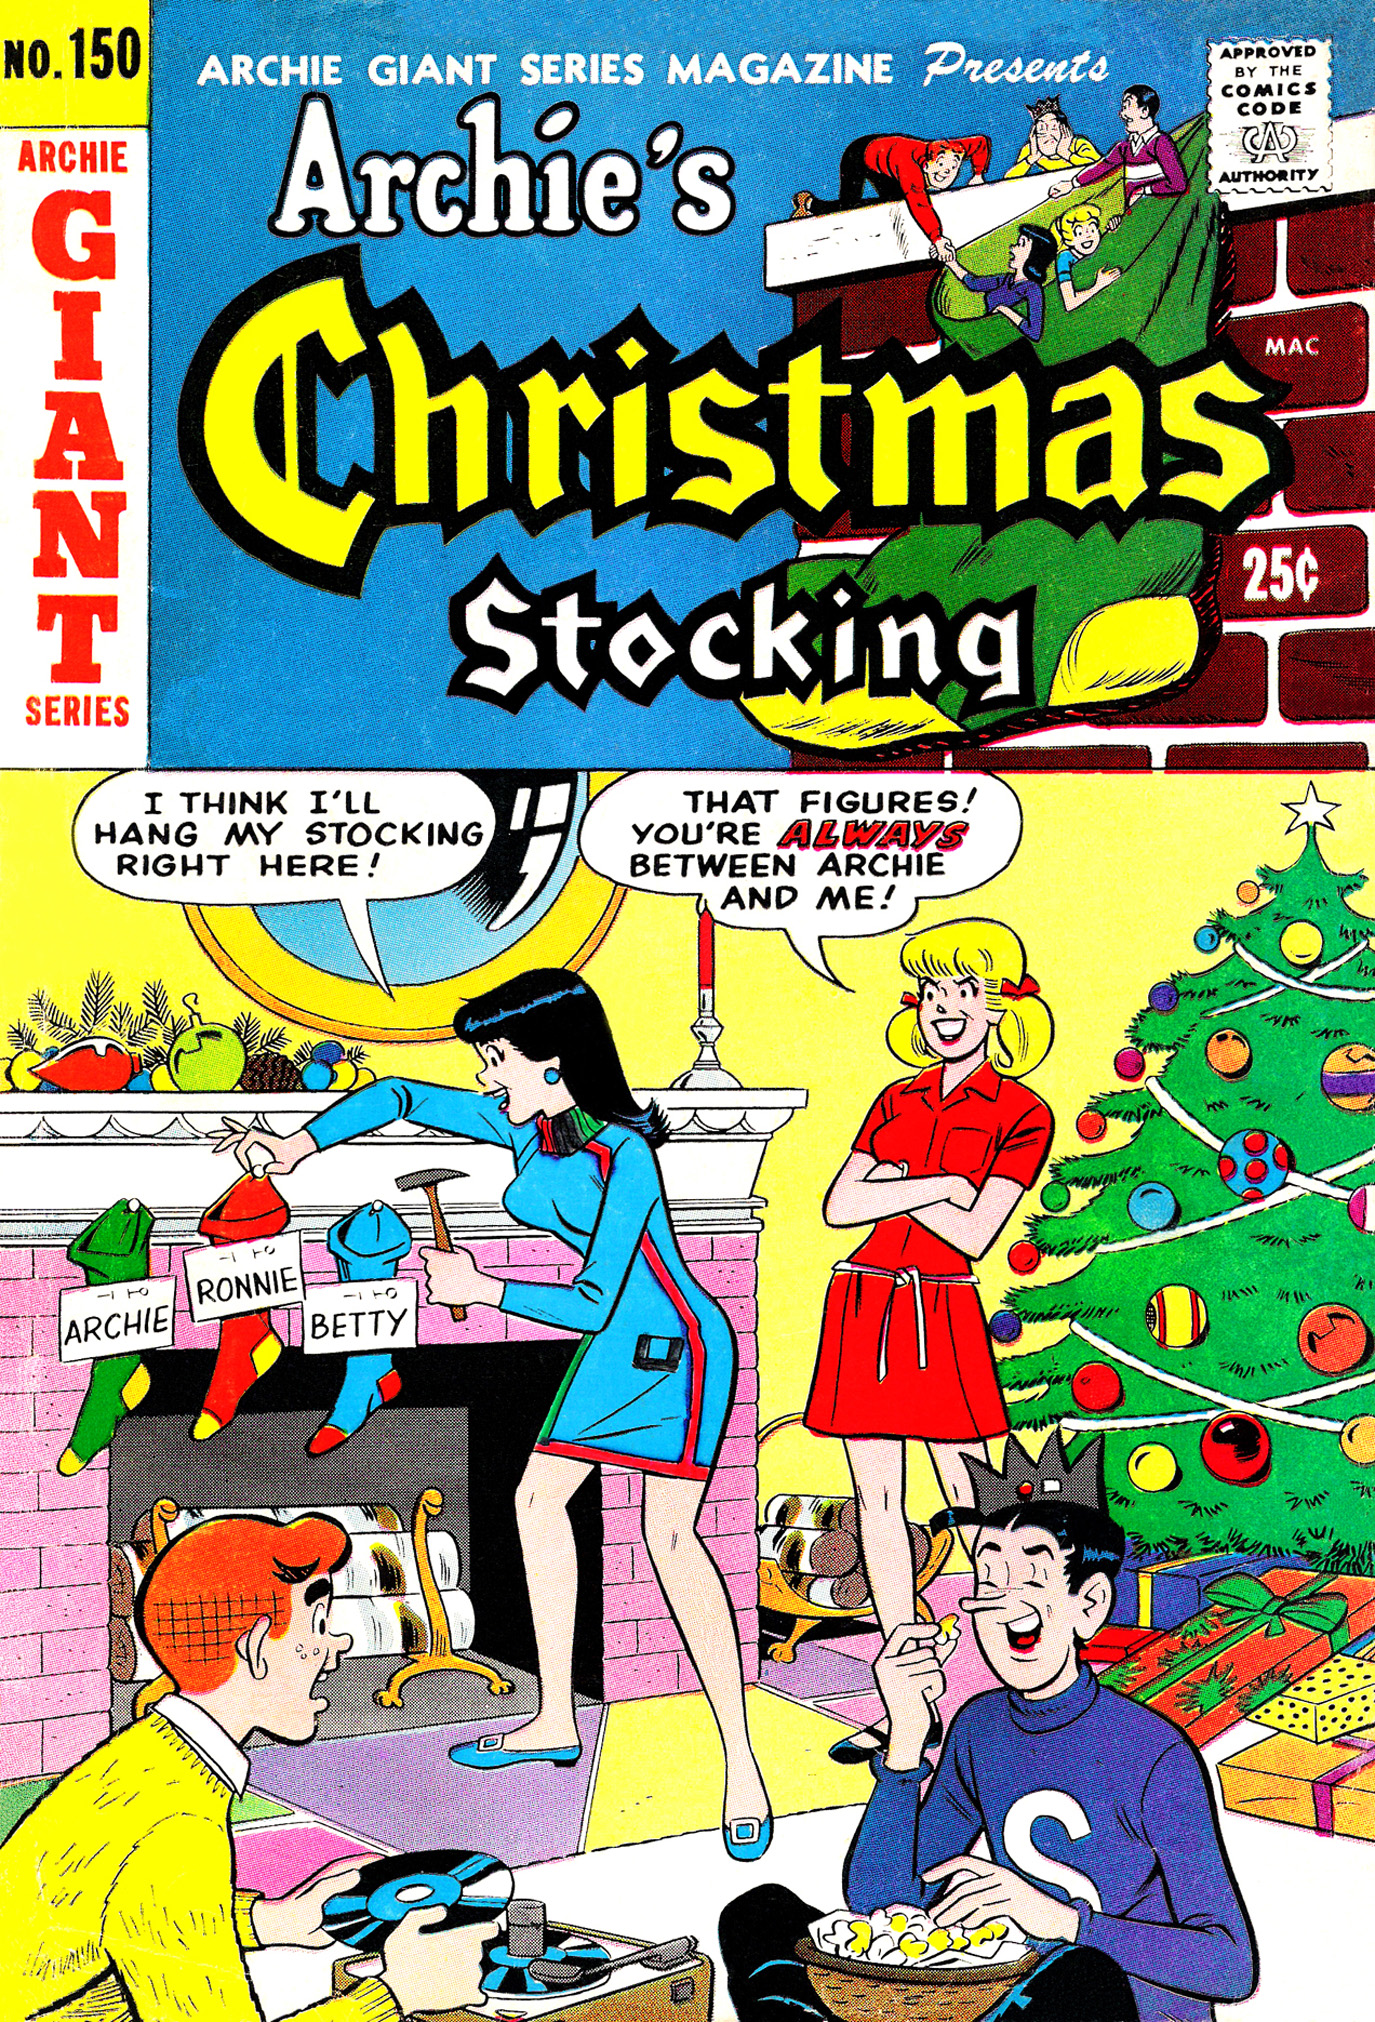 Read online Archie Giant Series Magazine comic -  Issue #150 - 1